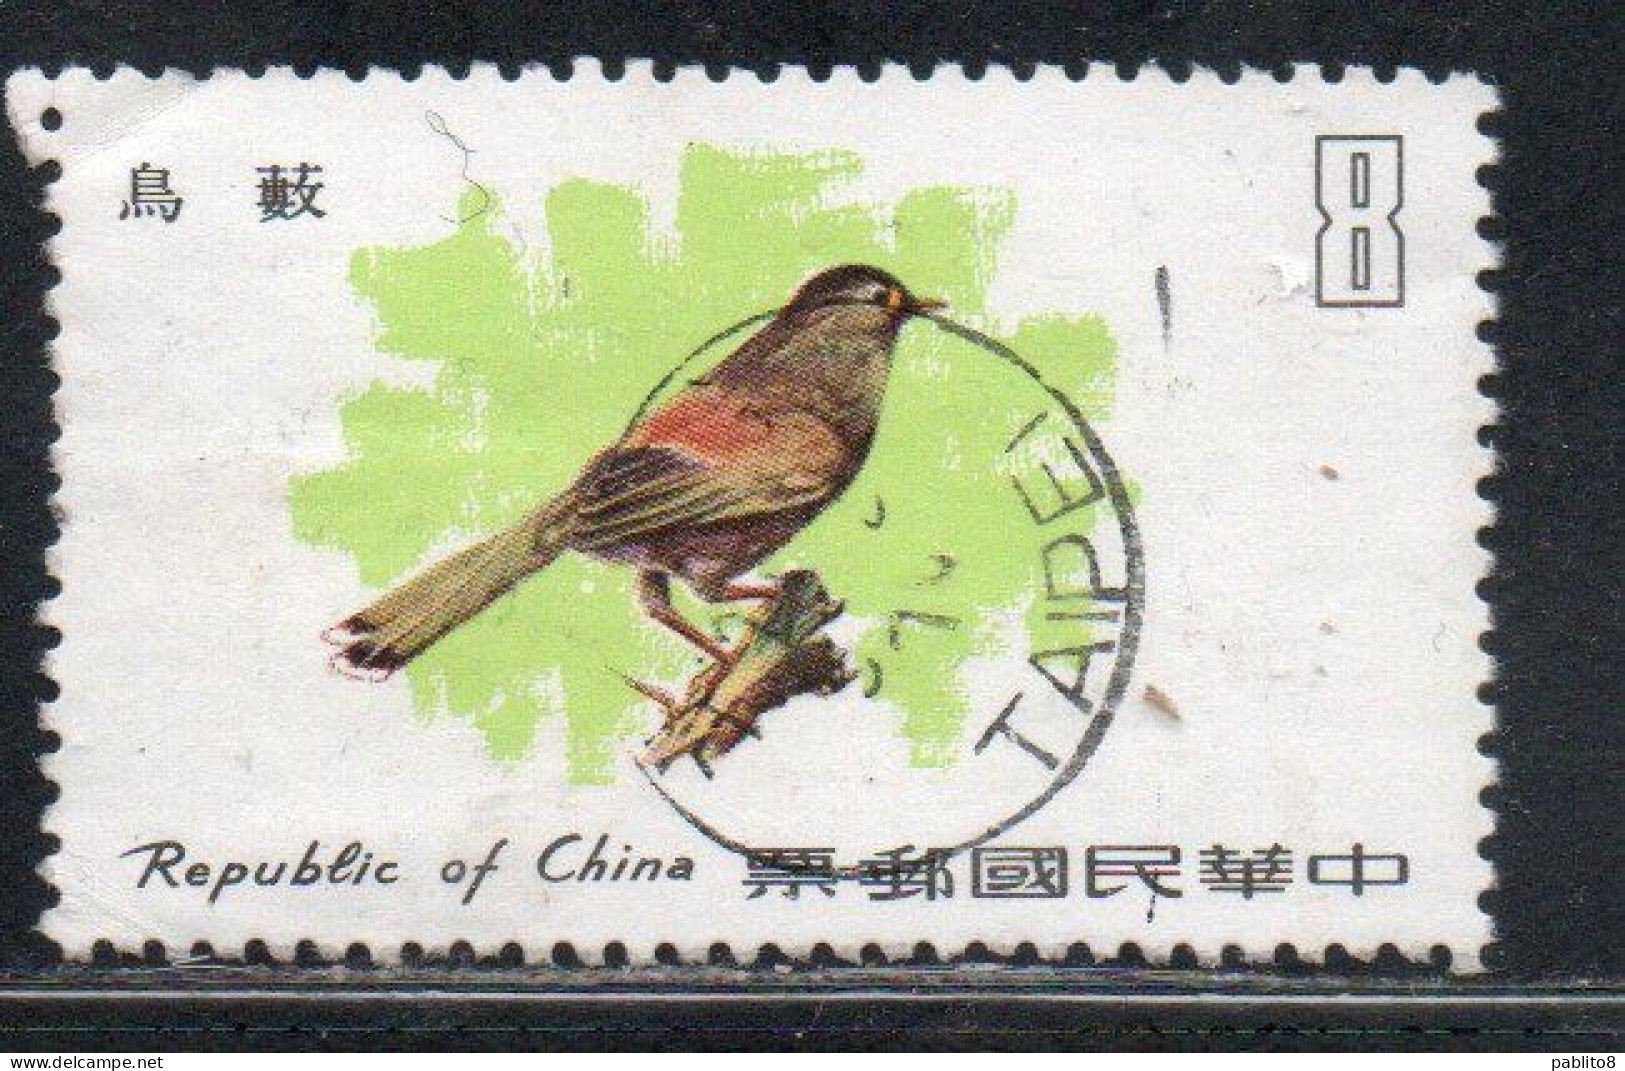 CHINA REPUBLIC CINA TAIWAN FORMOSA 1979 BIRD FAUNA BIRDS STEERE'S BABBLER 8$ USED USATO OBLITERE' - Used Stamps